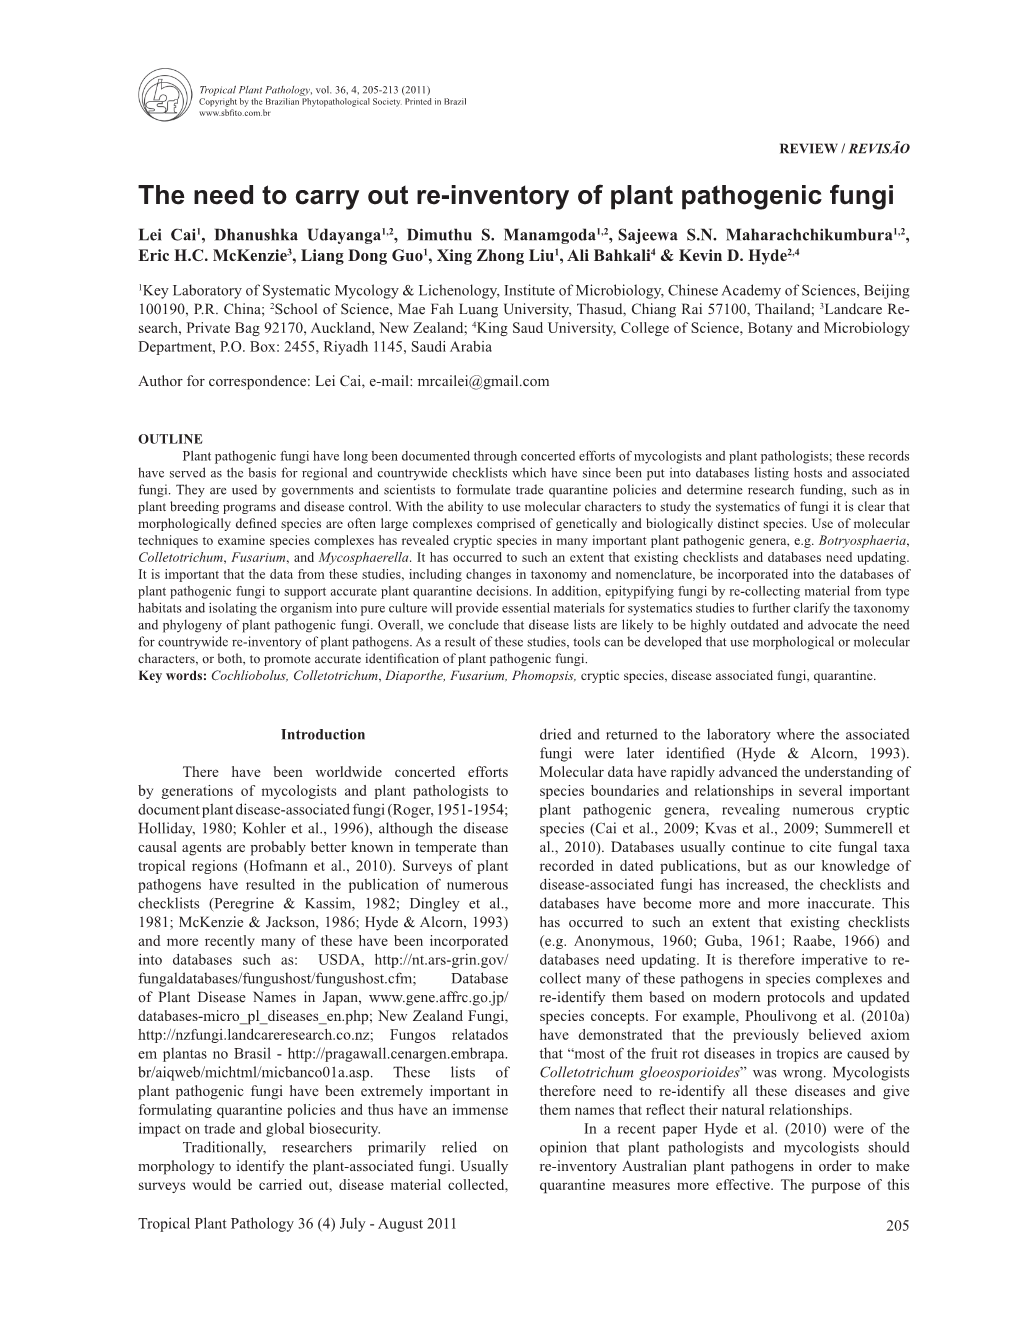 The Need to Carry out Re-Inventory of Plant Pathogenic Fungi Lei Cai1, Dhanushka Udayanga1,2, Dimuthu S